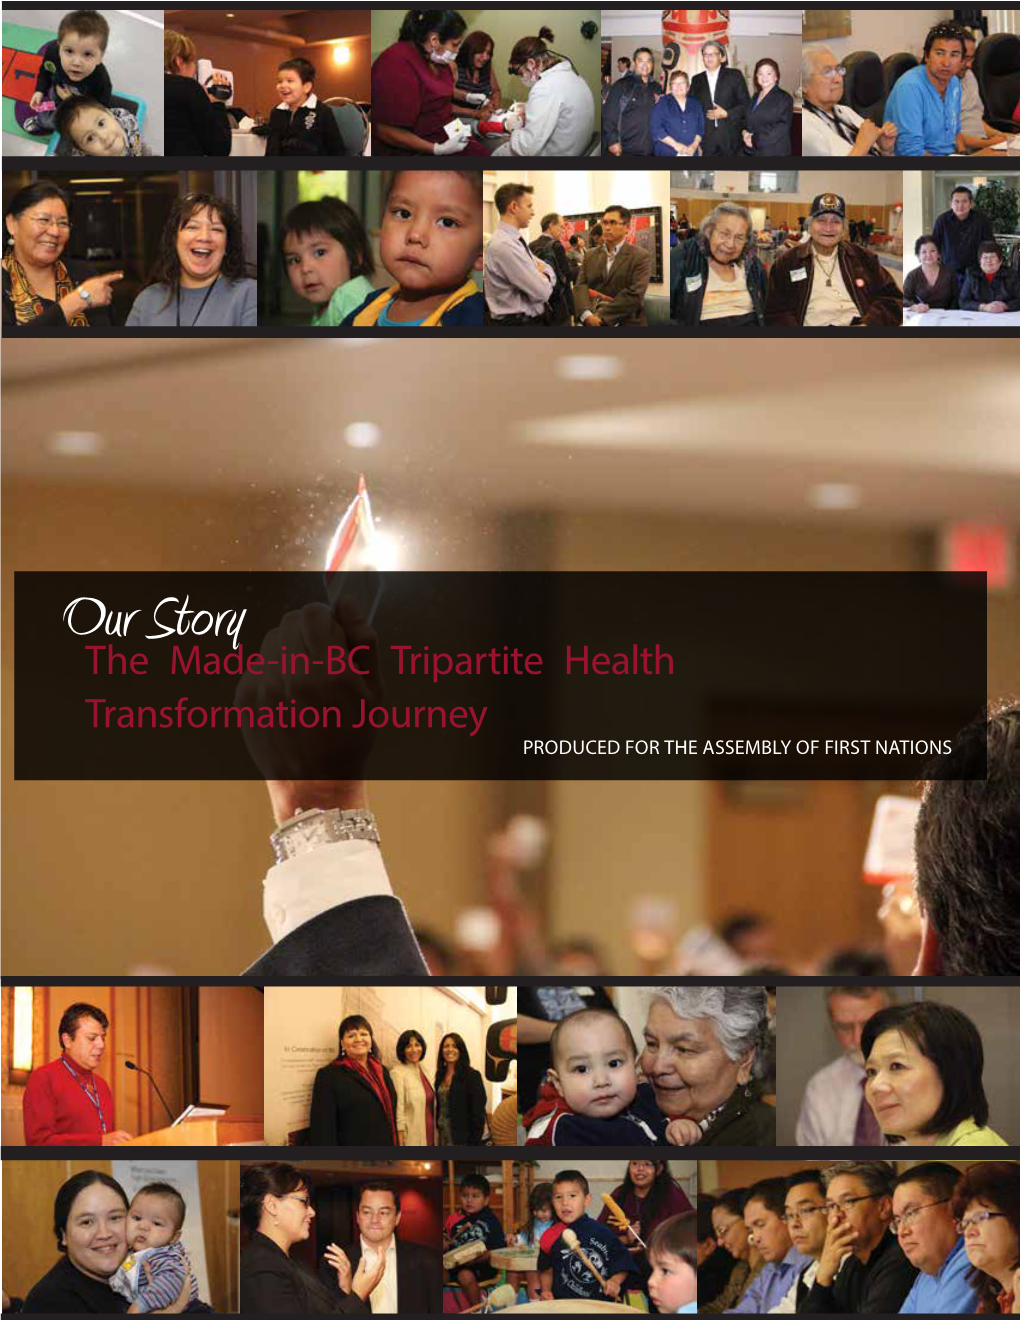 Our Story: the Made-In-BC Tripartite Health Transformation Journey